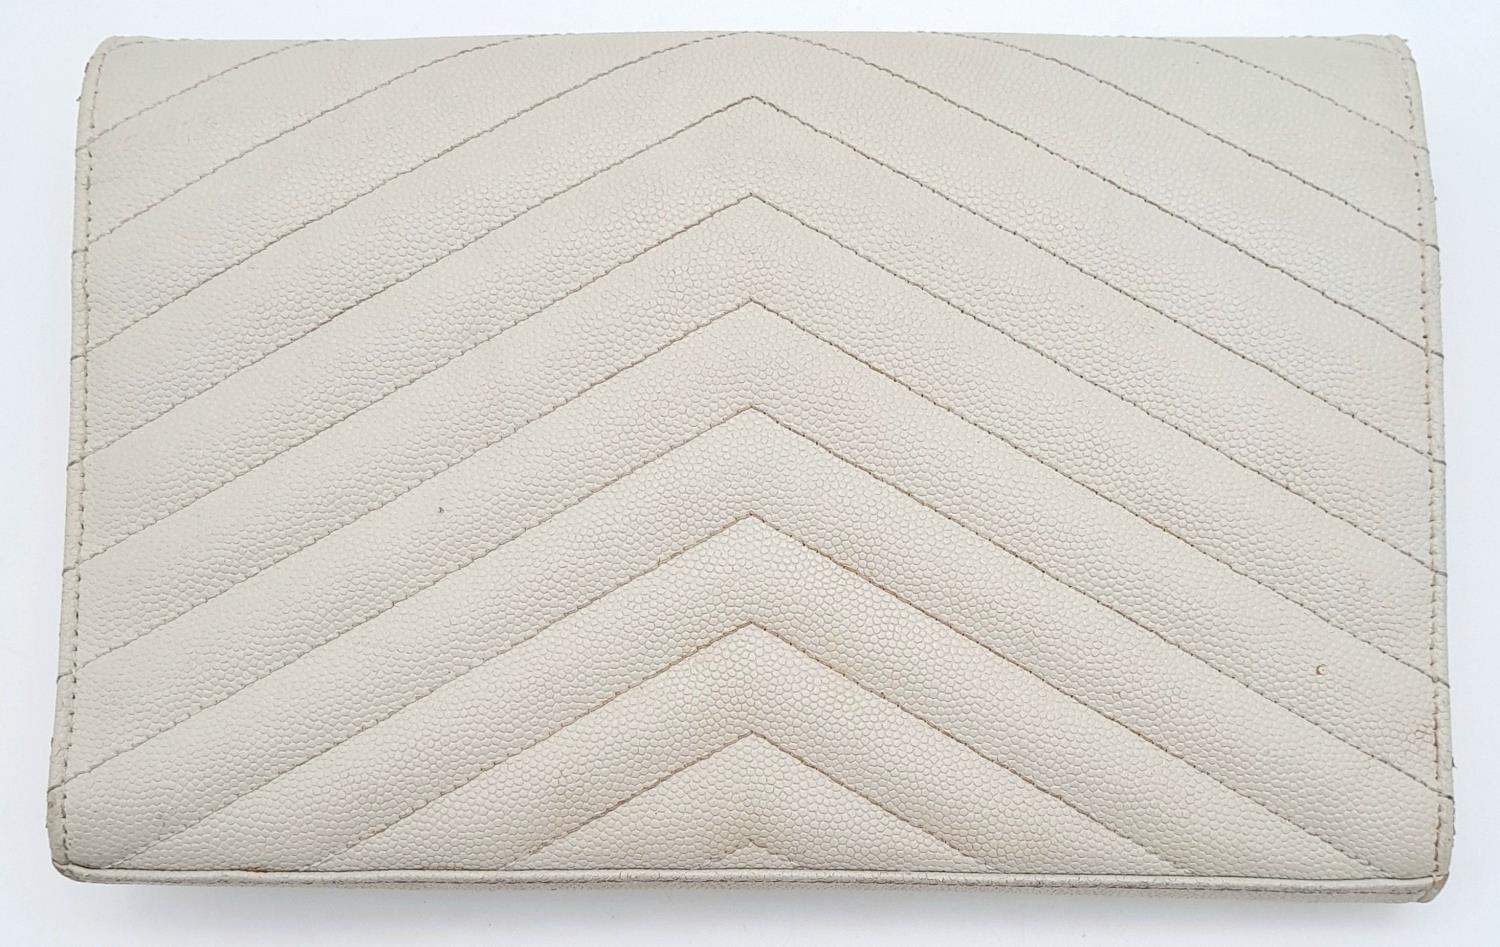 A YSL Ivory Cassandre Wallet Bag. Leather exterior with gold-toned hardware, the iconic YSL logo, - Image 2 of 13